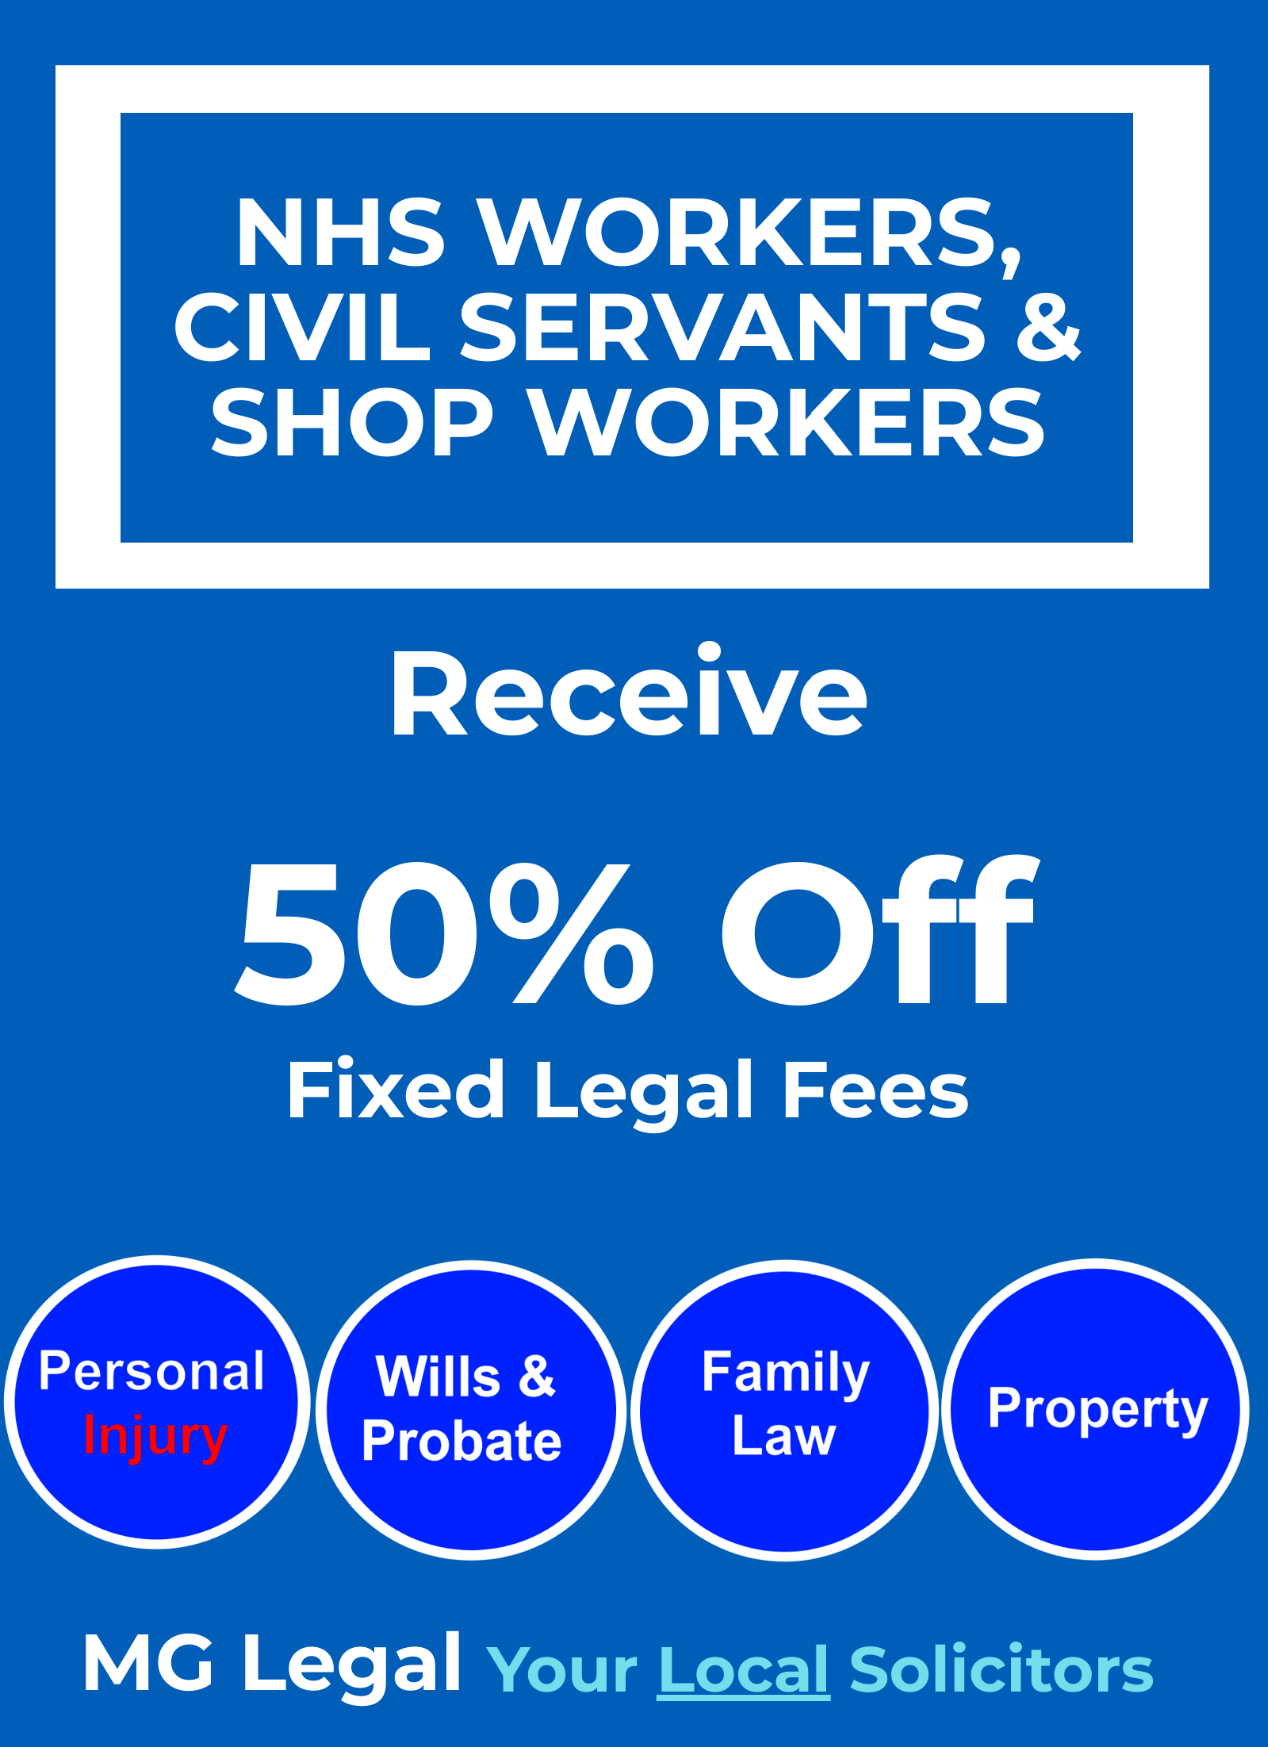 NHS Workers, Civil Servants & Shop Workers recieve 50% off fixed legal fees.